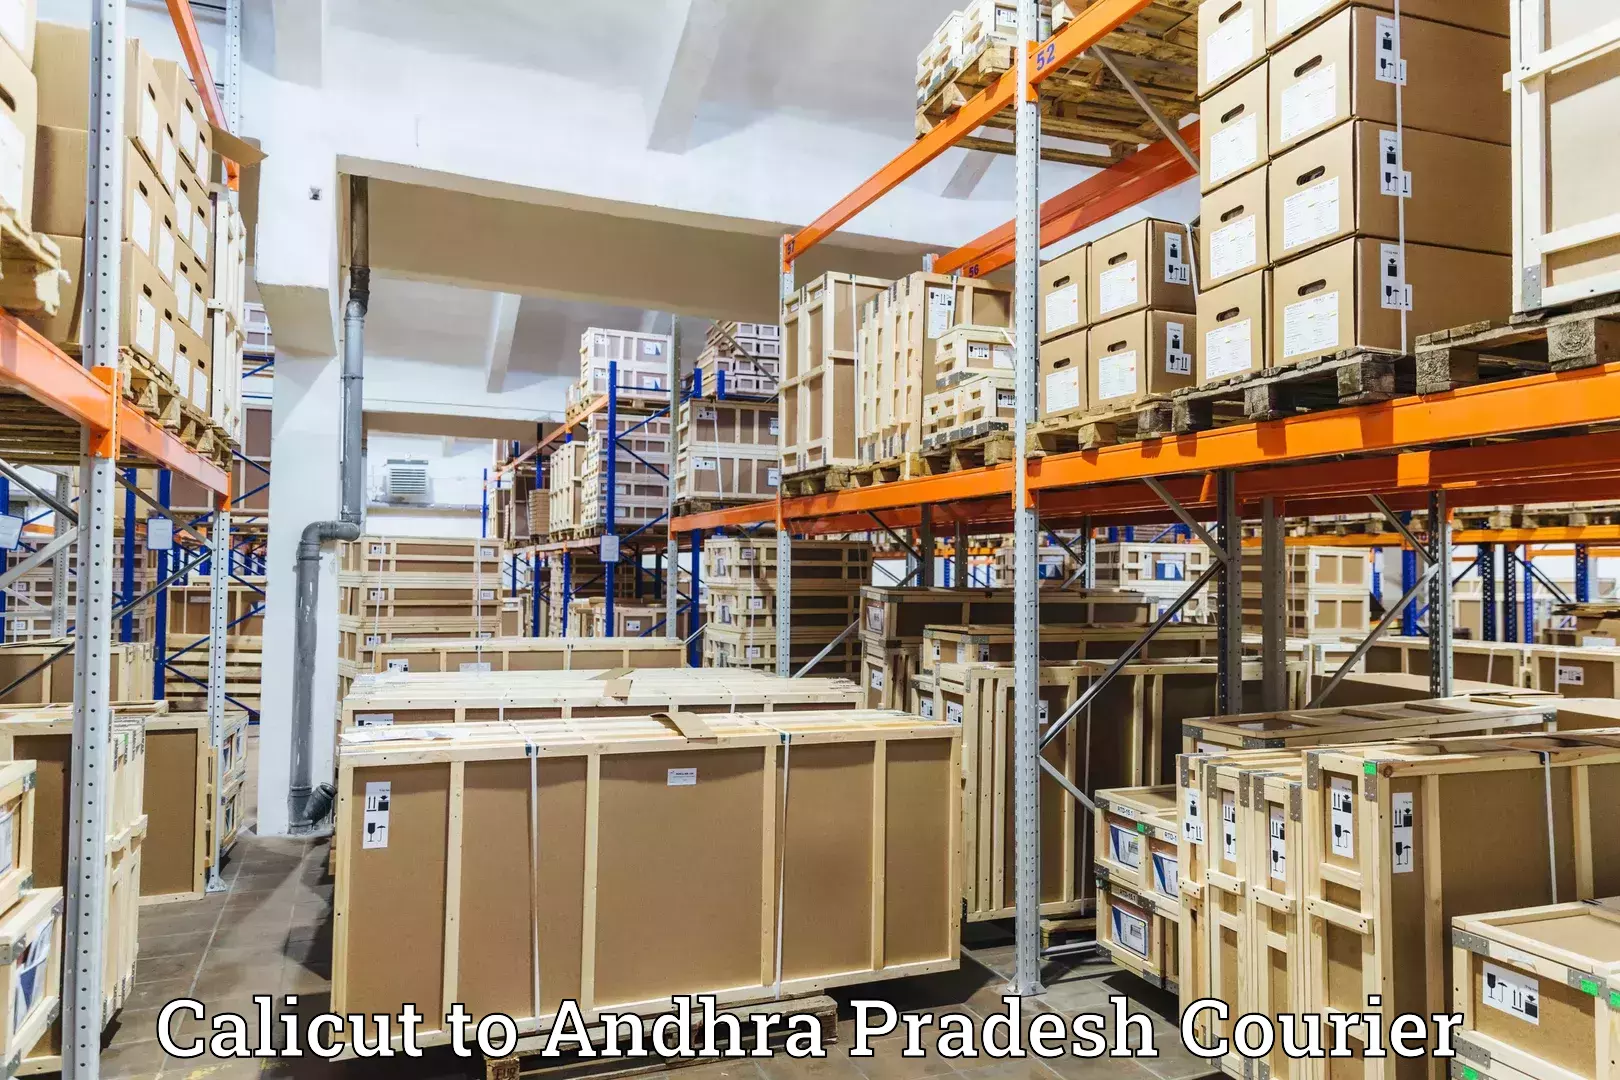 Customer-oriented courier services in Calicut to Penukonda